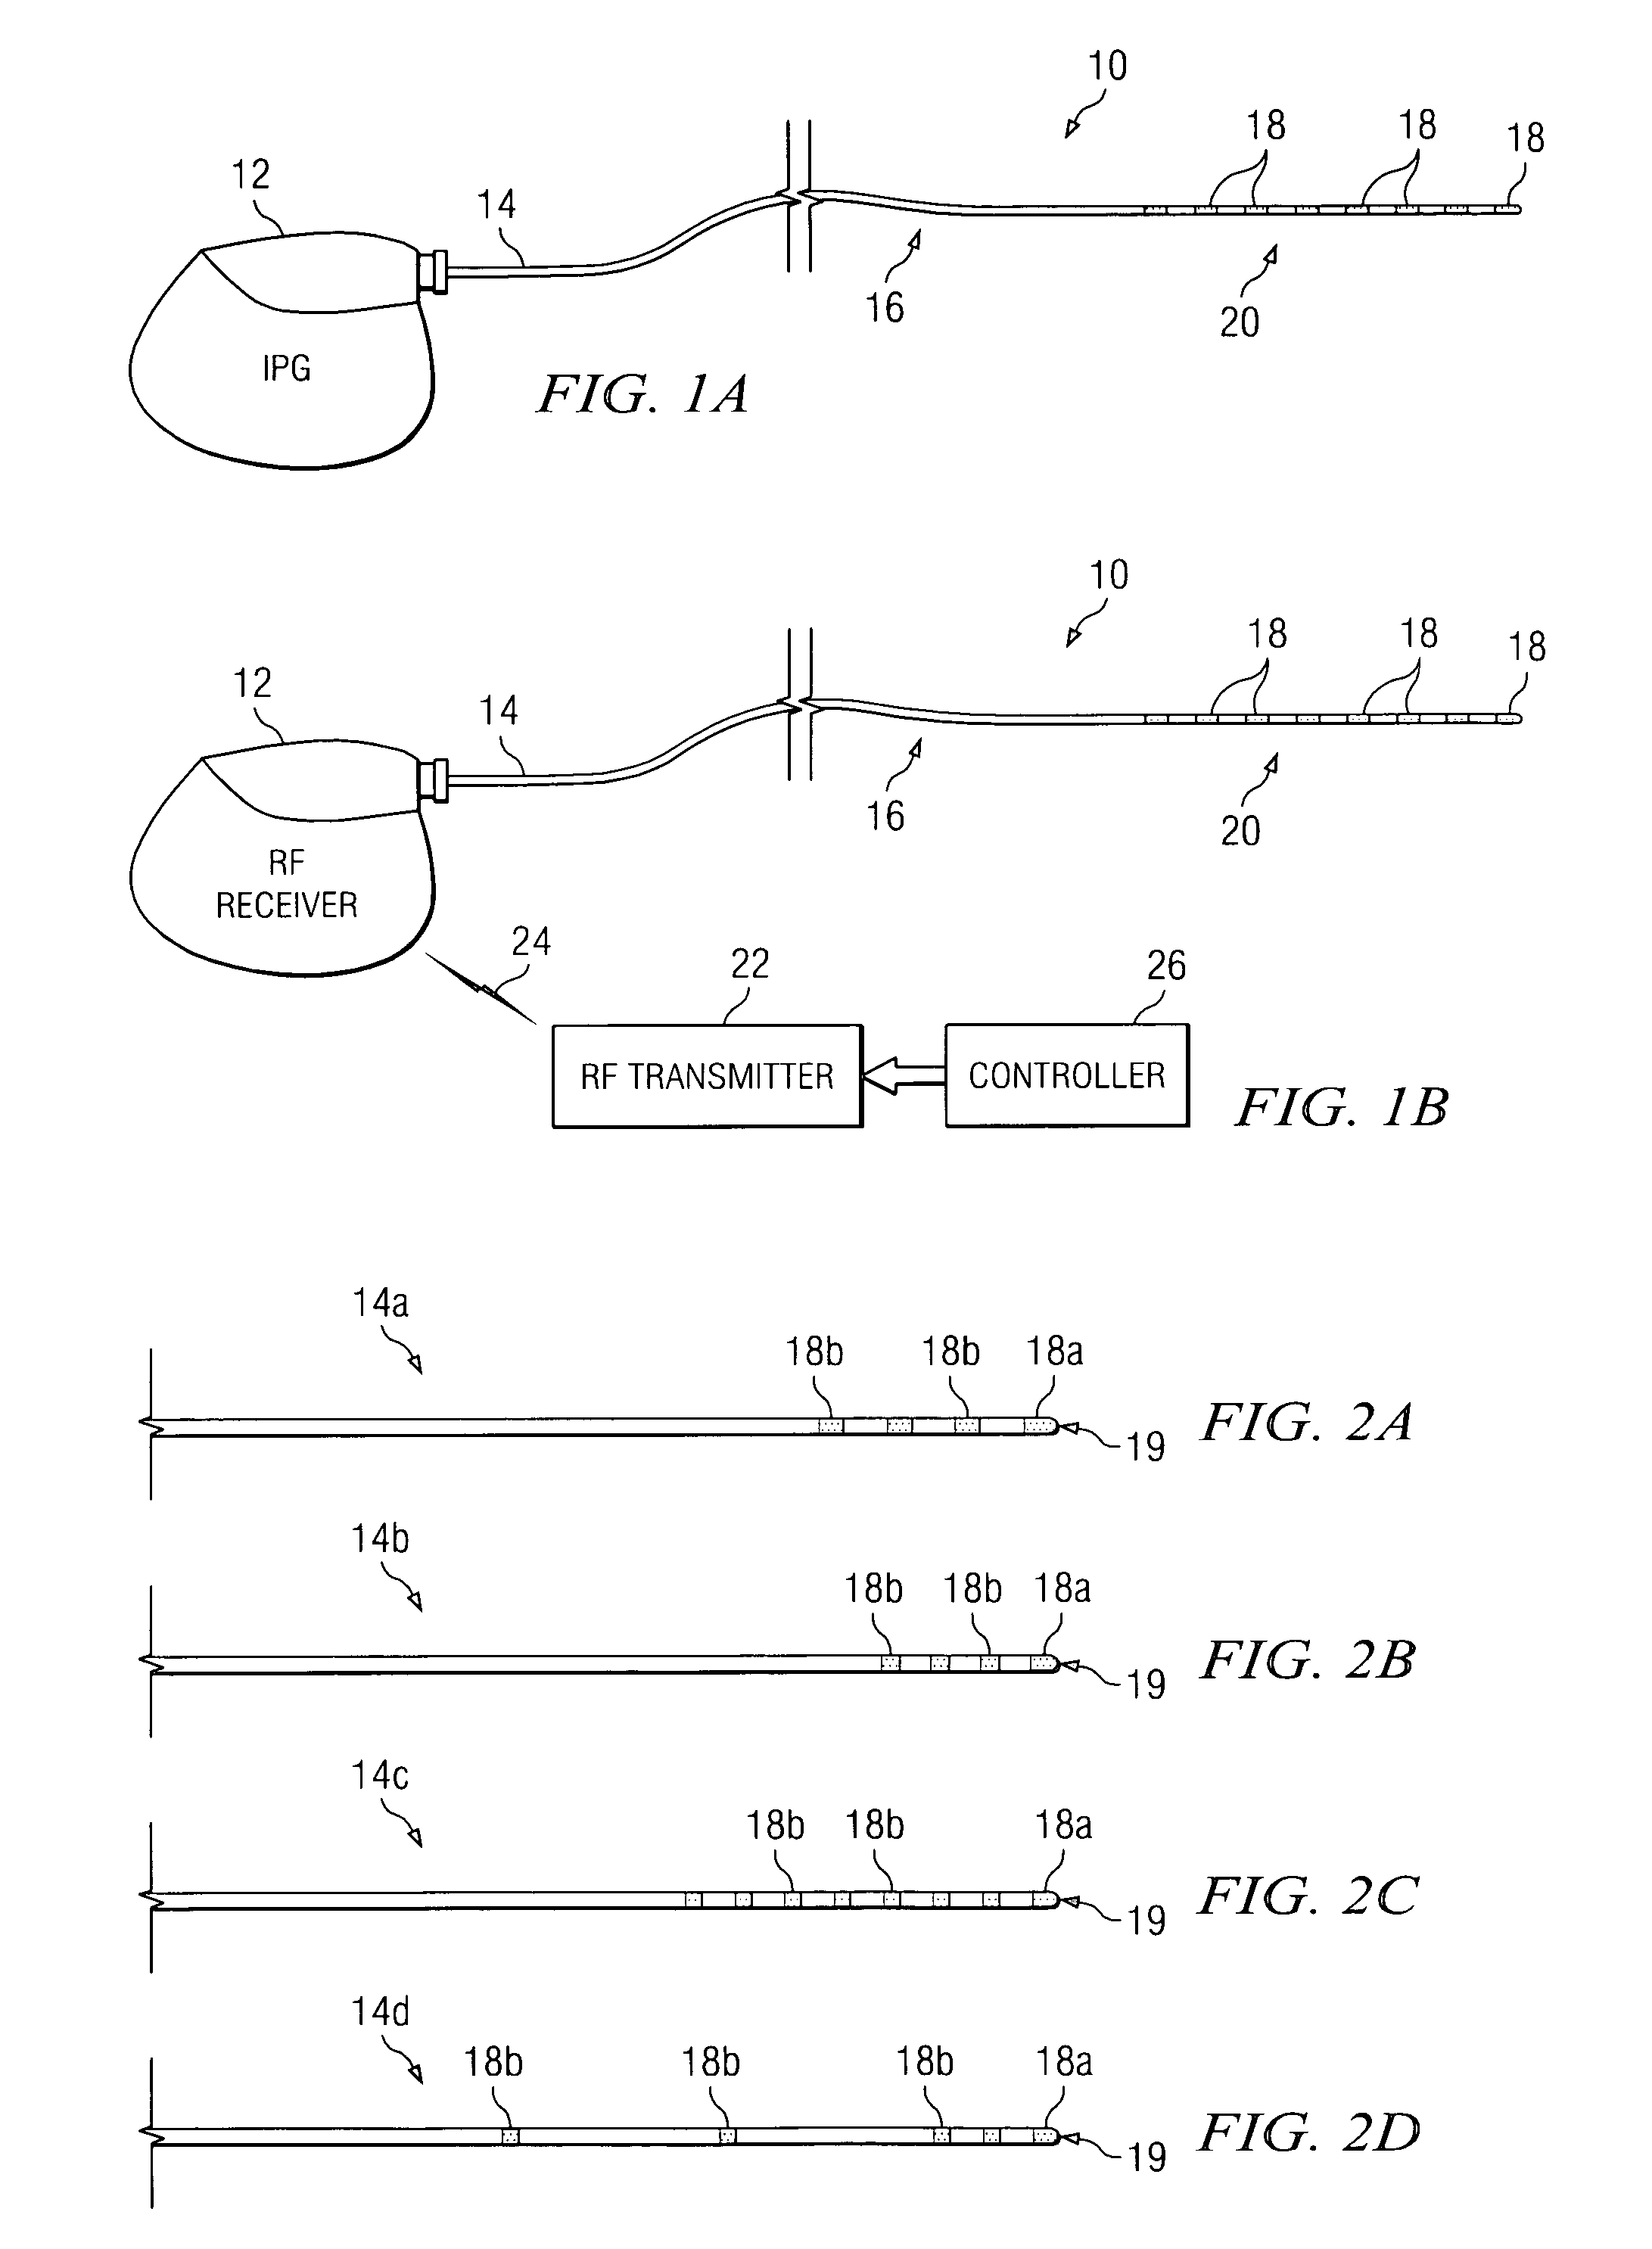 Electrical stimulation system and method for stimulating nerve tissue in the brain using a stimulation lead having a tip electrode, having at least five electrodes, or both